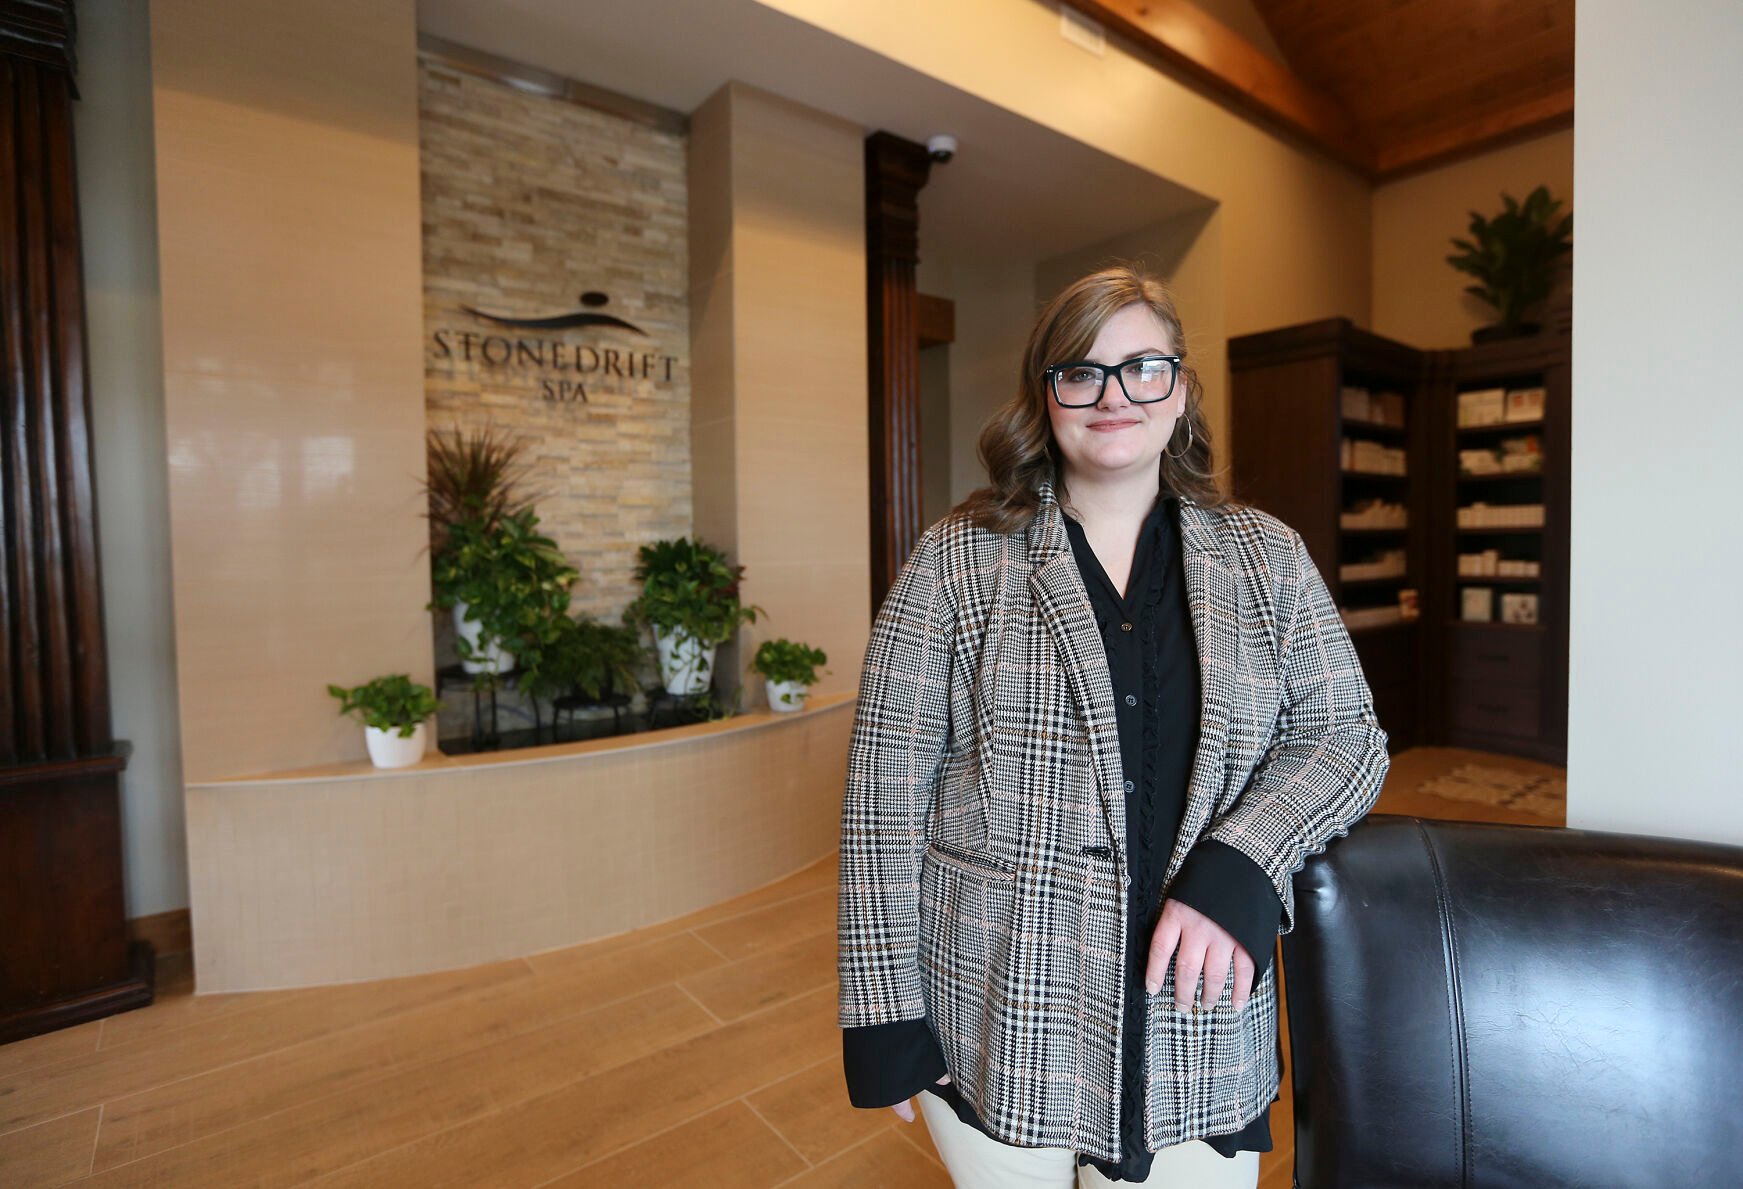 Director of Stonedrift Spa Abbi Porter stands in the lobby of the business located in the Galena Territories on Wednesday, Nov. 30, 2022.    PHOTO CREDIT: Dave Kettering